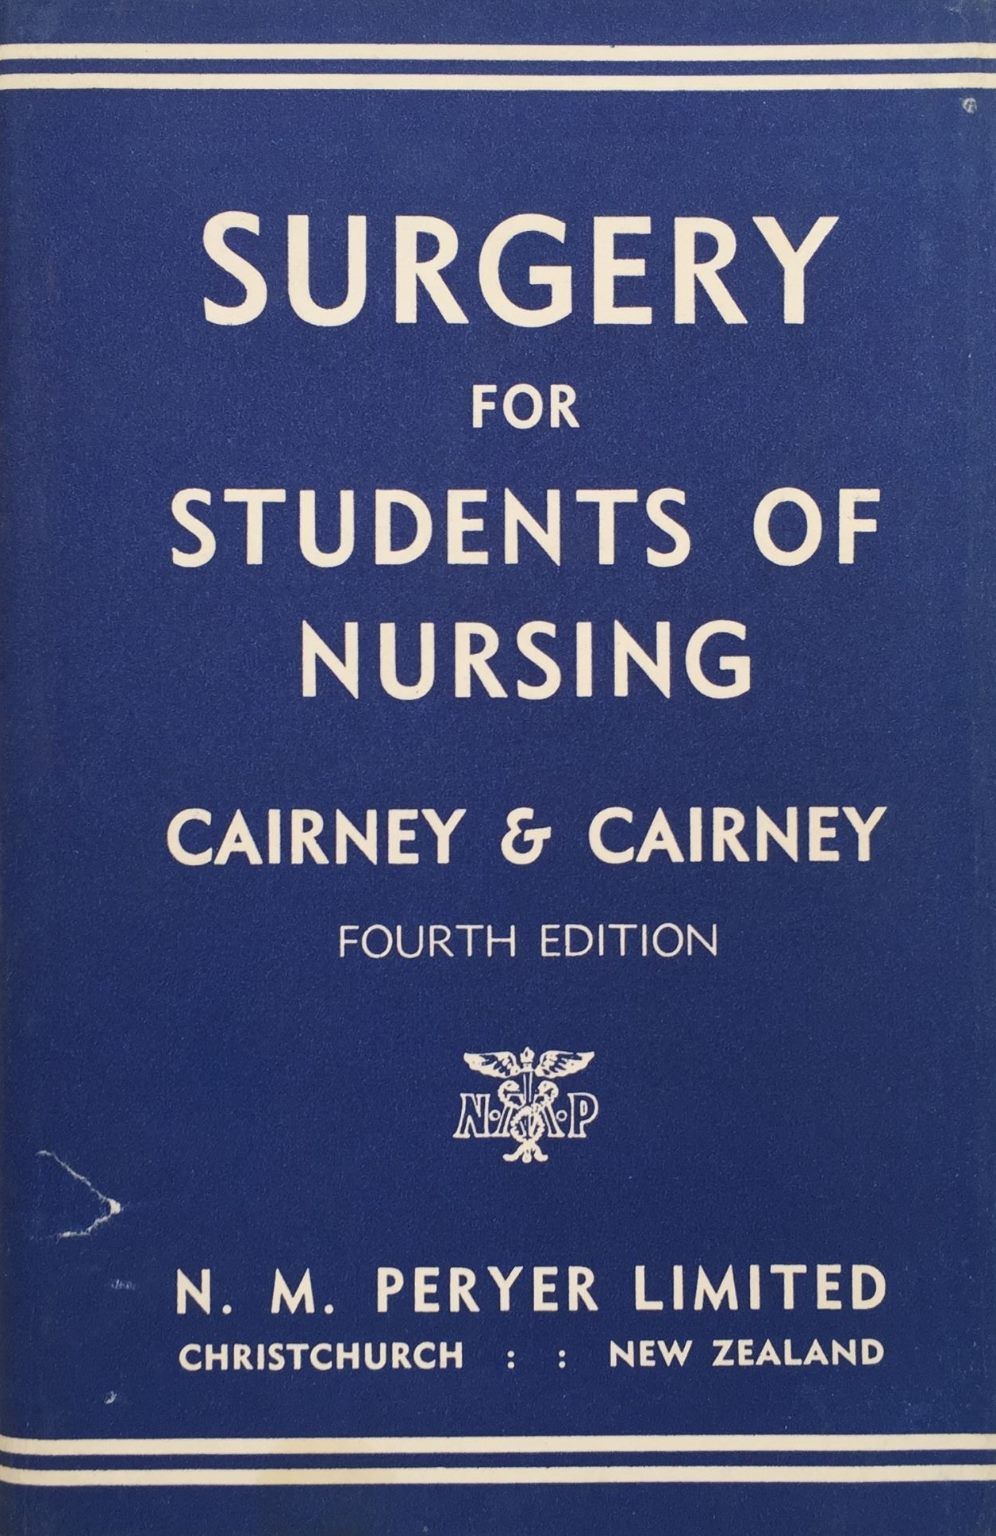 SURGERY FOR STUDENTS OF NURSING